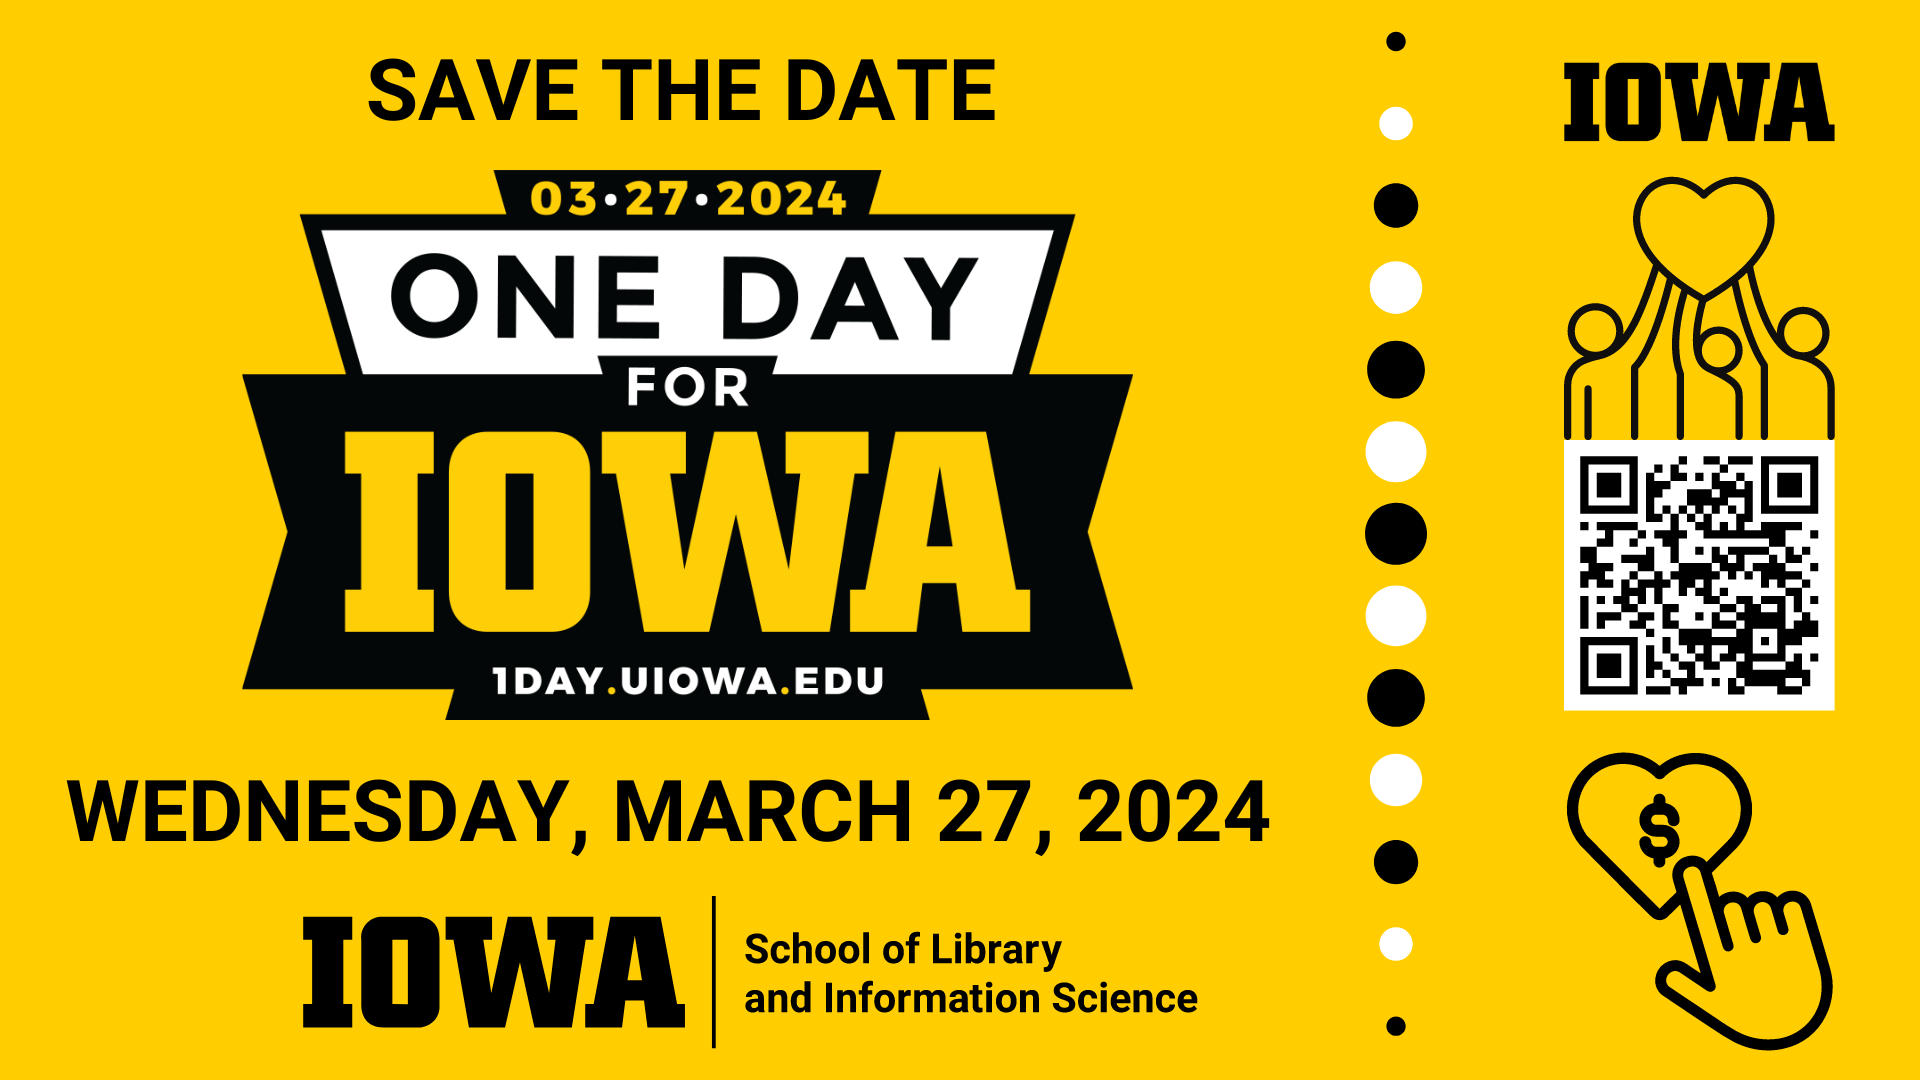 Save the date one day for iowa, march 27, 2024